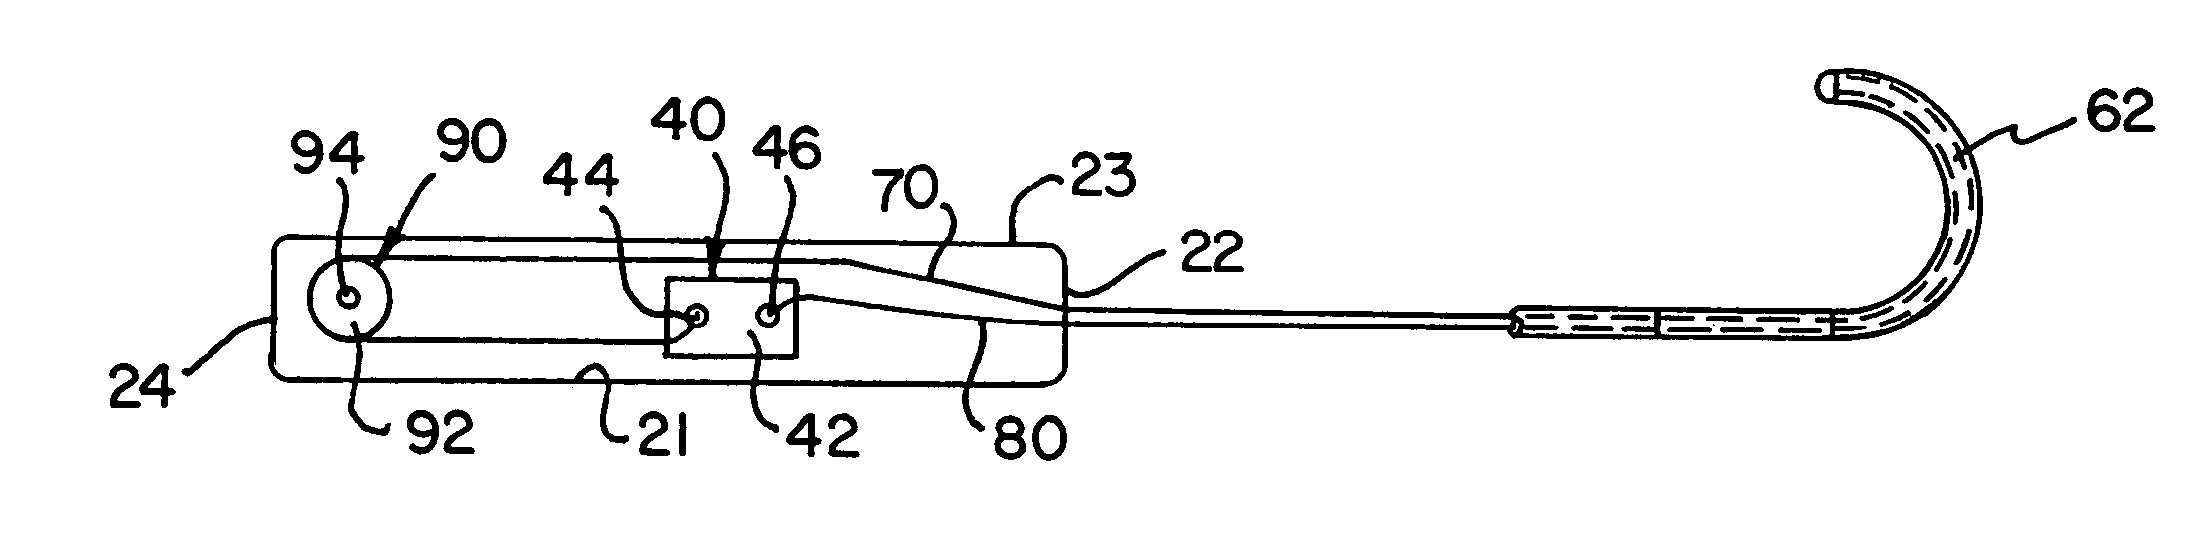 Active counterforce handle for use in bidirectional deflectable tip instruments